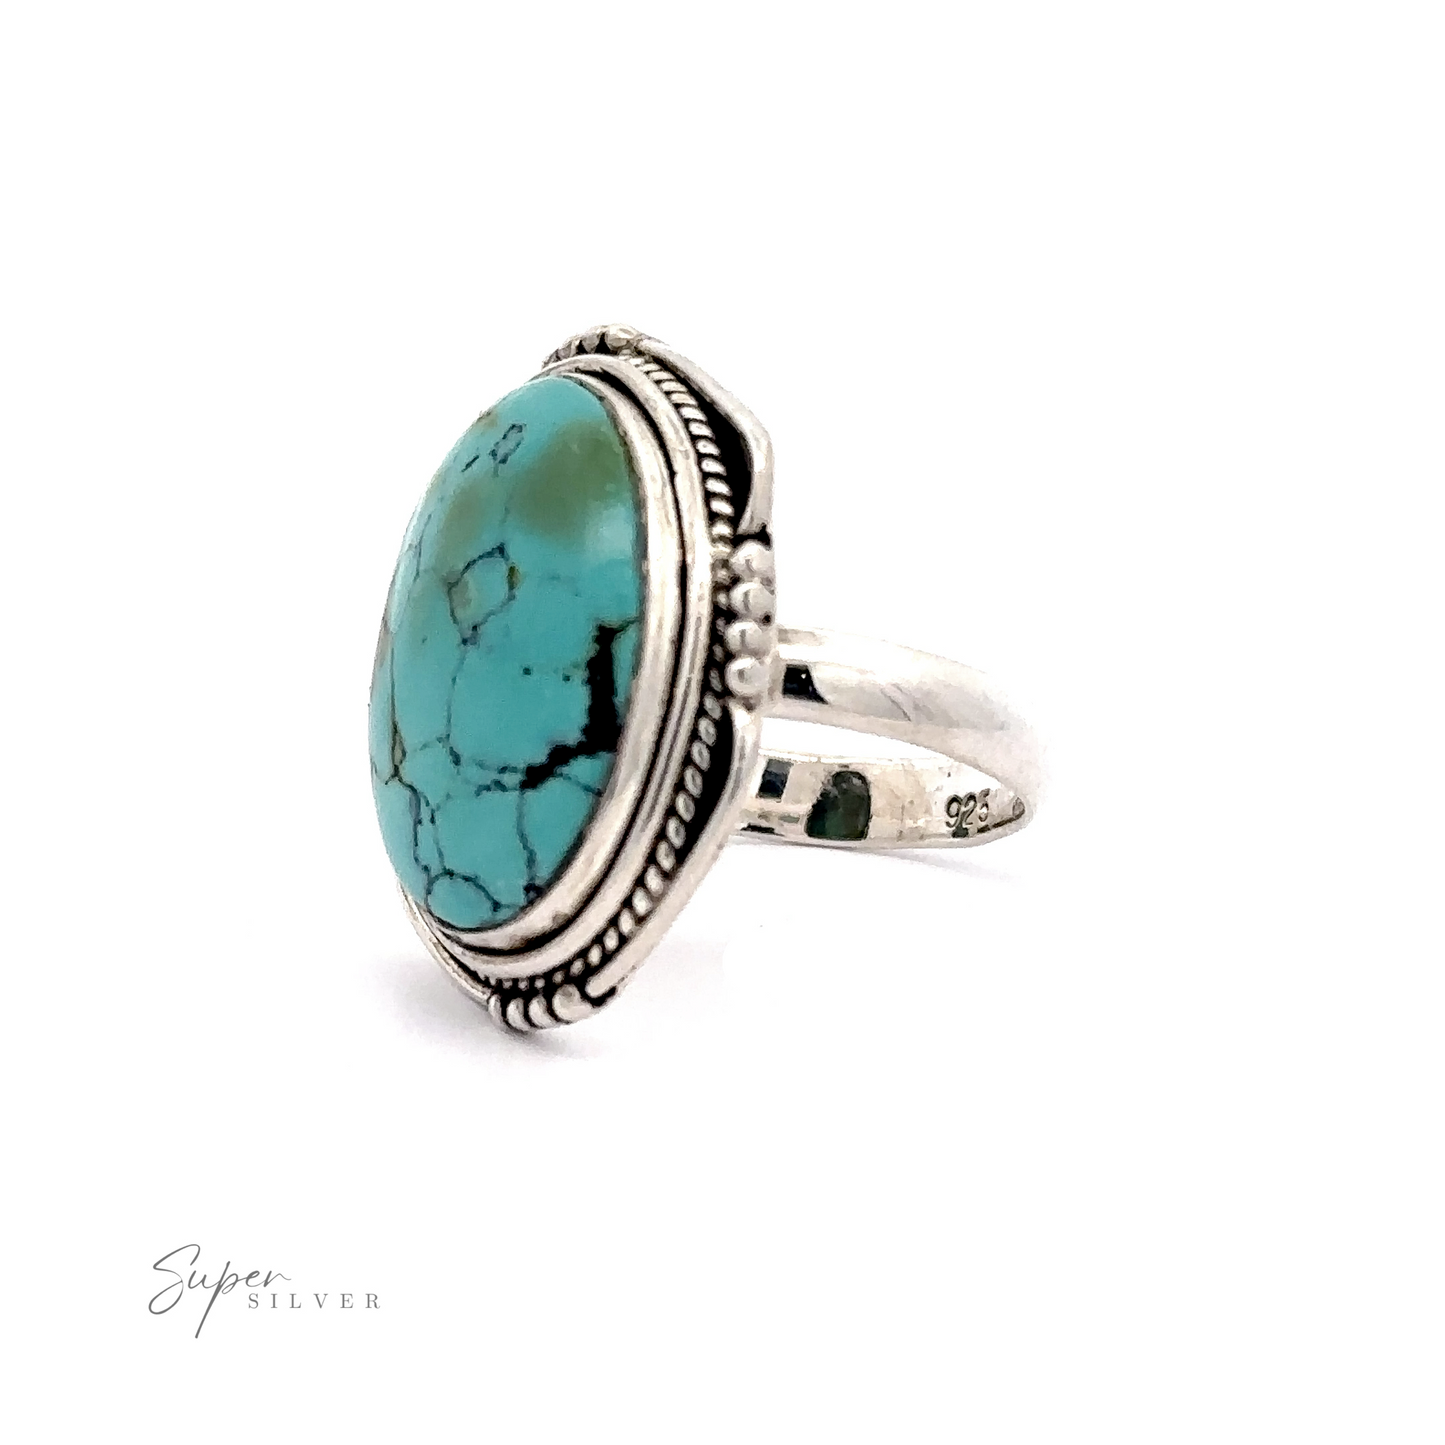 A Natural Turquoise Ring With Rope Design features a large oval-shaped natural turquoise stone with a decorative border. The band is stamped with "925." The name "Super Silver" is visible in the bottom left corner.